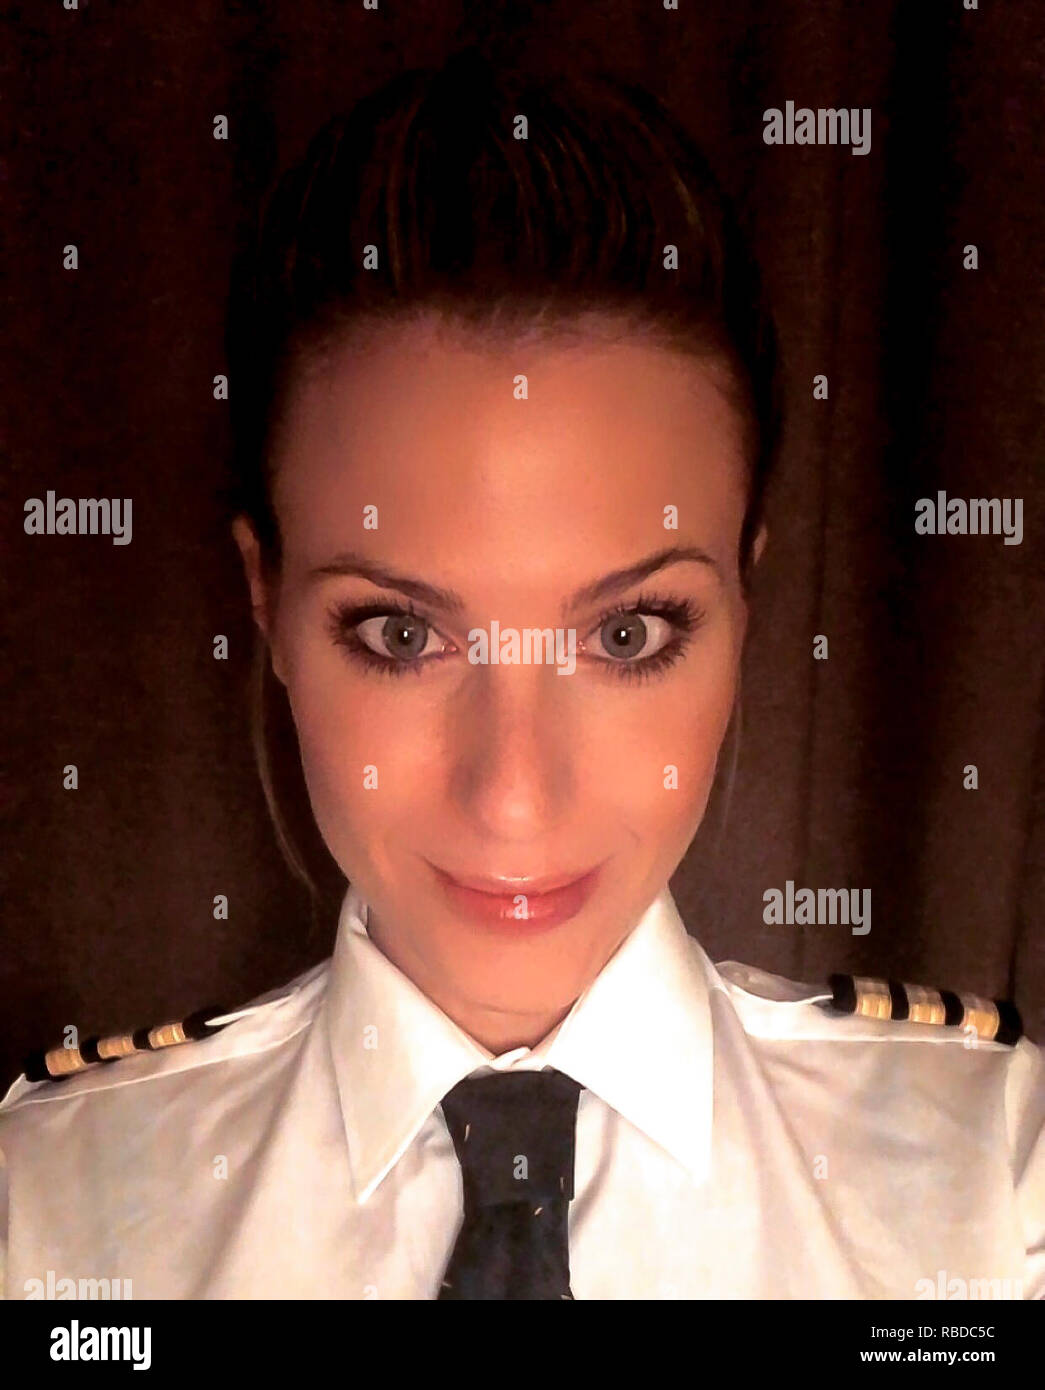 Selfie. MEET the stunning pilot whose behind the scenes shots of her job and adventurous lifestyle have made her an Instagram star. First officer Sara Johansson (33), Borås, Sweden has amassed more than 22k followers on the social media site thanks to her incredible images. Striking shots show the beauty queen in her uniform at work in the cockpit or chilling on a plane wing while others show Sara on her days off exploring the exotic locations she gets to fly to. Sara has worked as a commercial pilot for two and a half years, flying both passengers and cargo on a Boeing 737 but is now flying C Stock Photo